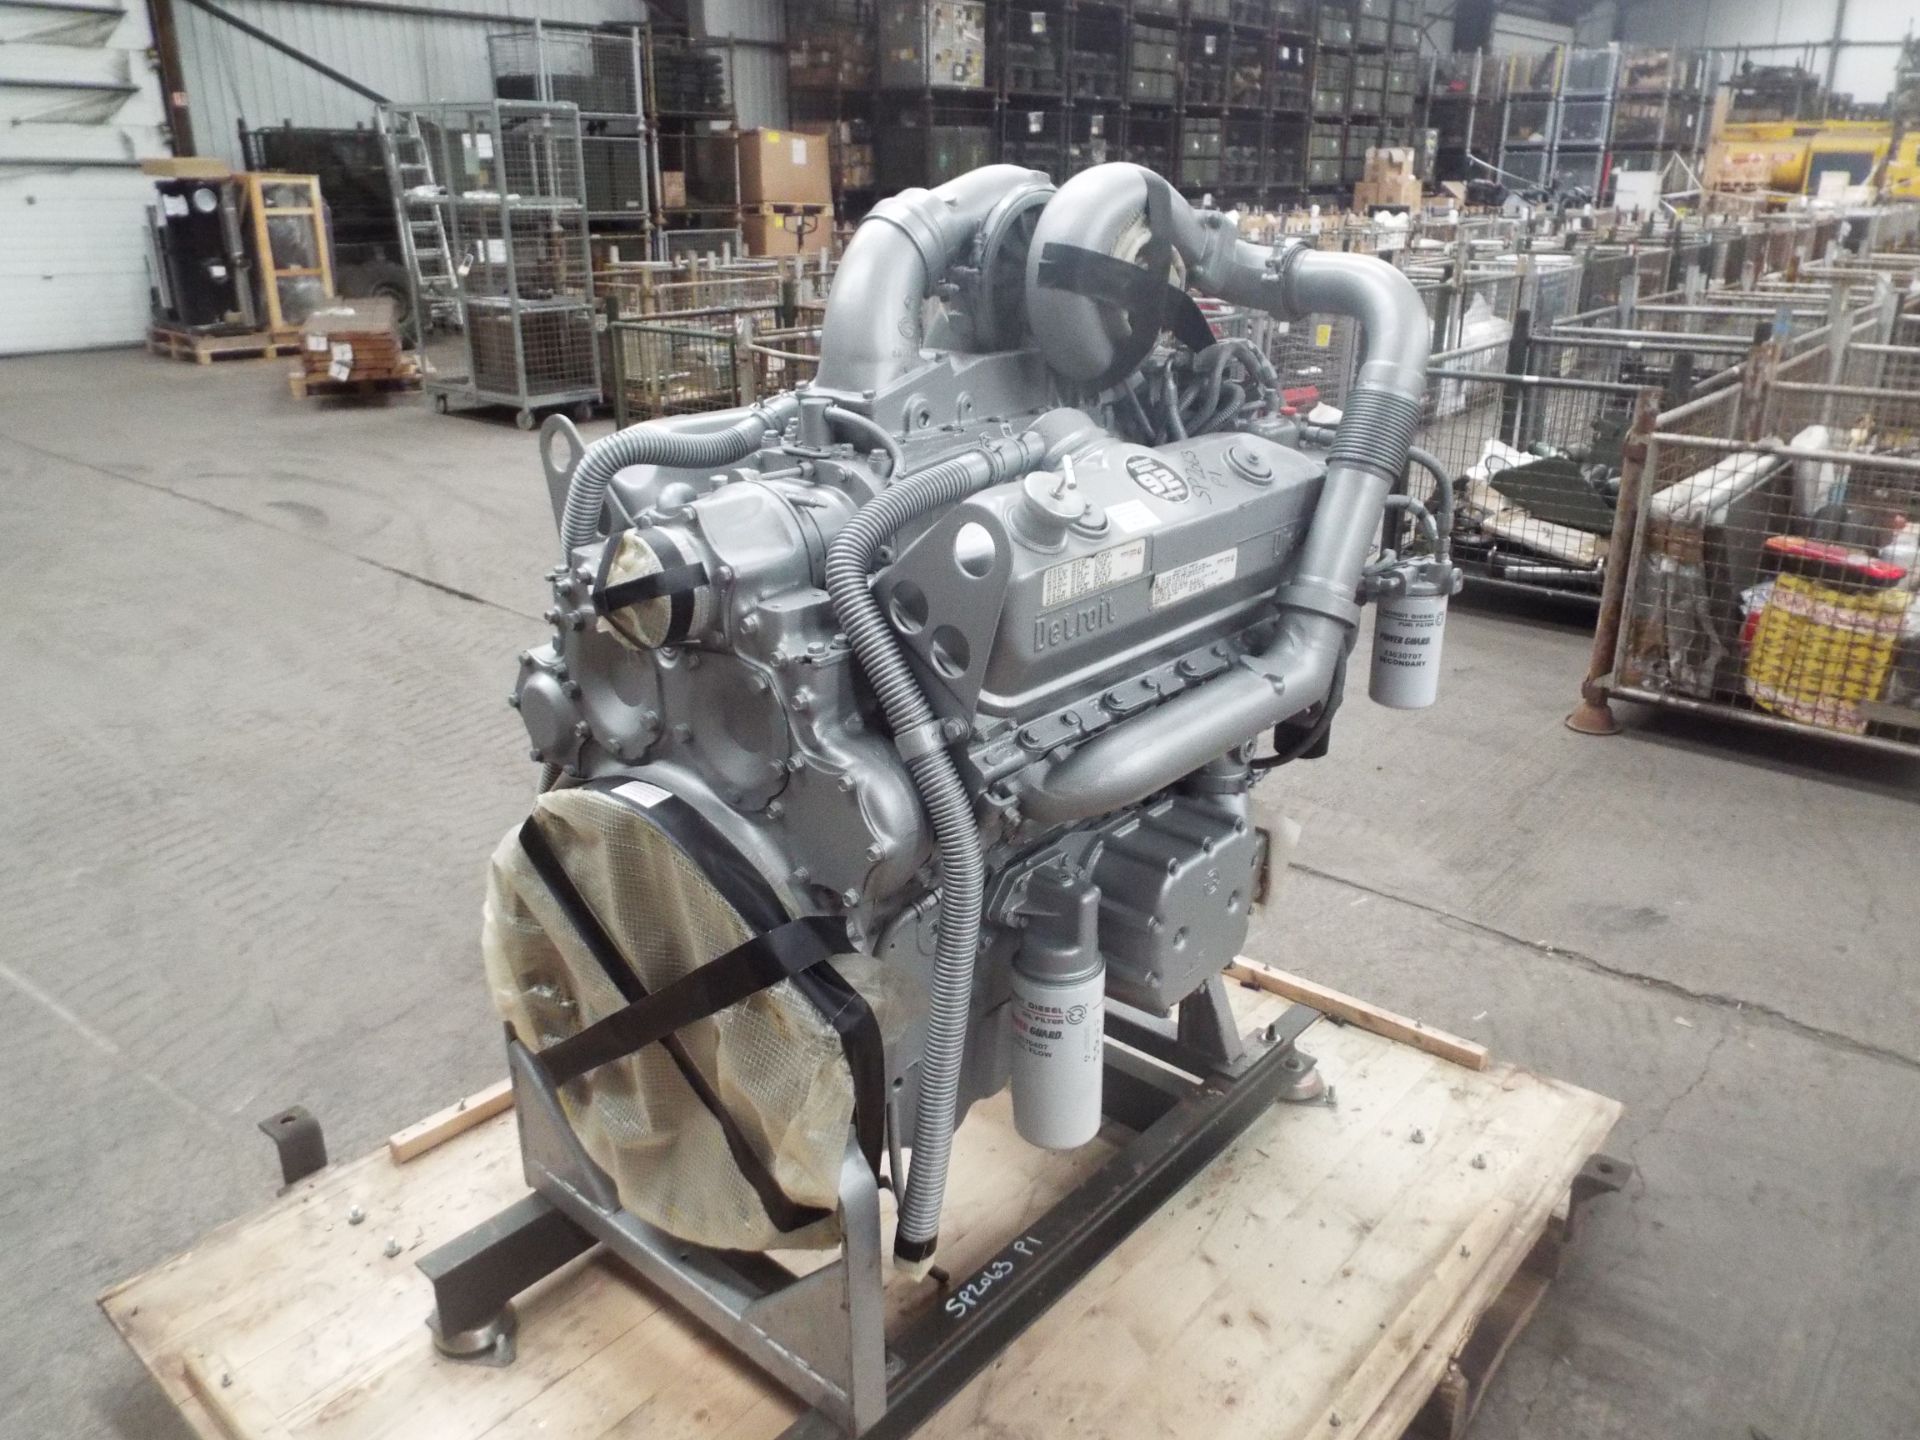 Detroit 8V-92TA DDEC V8 Turbo Diesel Engine Complete with Ancillaries and Starter Motor - Image 7 of 20